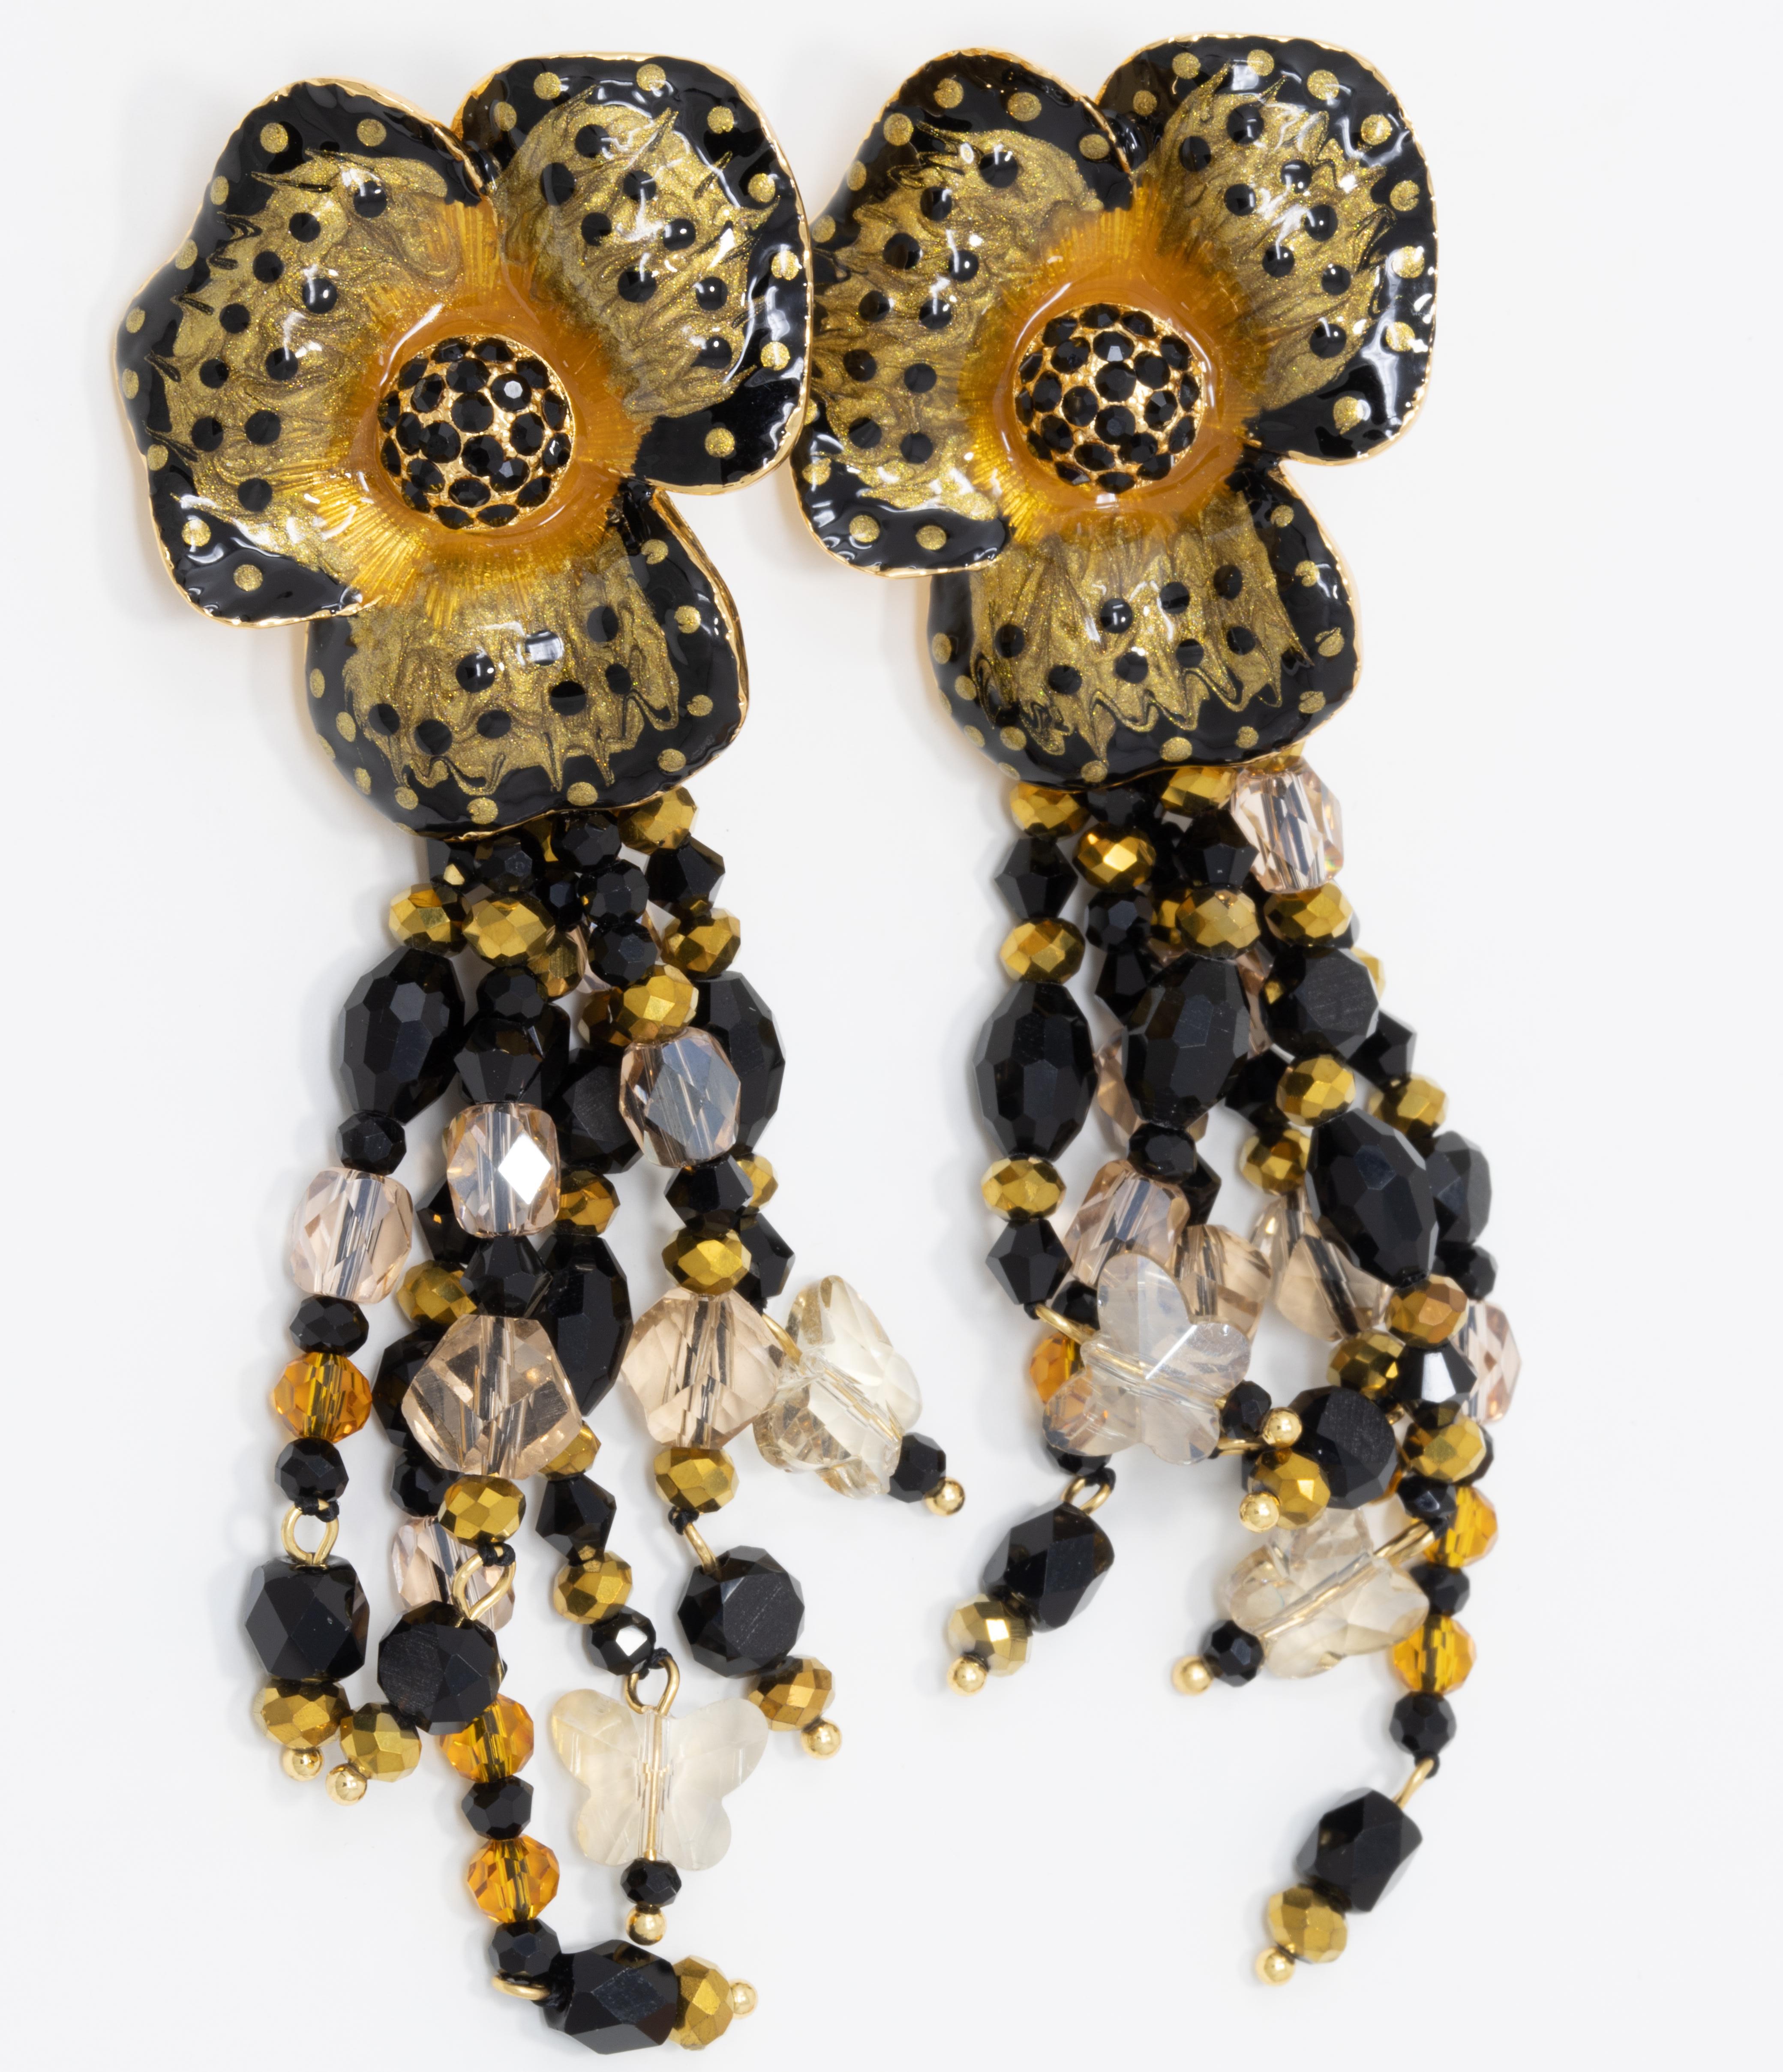 Flower power! A pair of ornate floral clip on earrings featuring dangle jet-black, topaz, and gold crystal strands. Painted with black and yellow enamel. Set on gold plated metal.

Hallmarks: Jay, Jay Strongwater, CN

By Jay Strongwater, originally